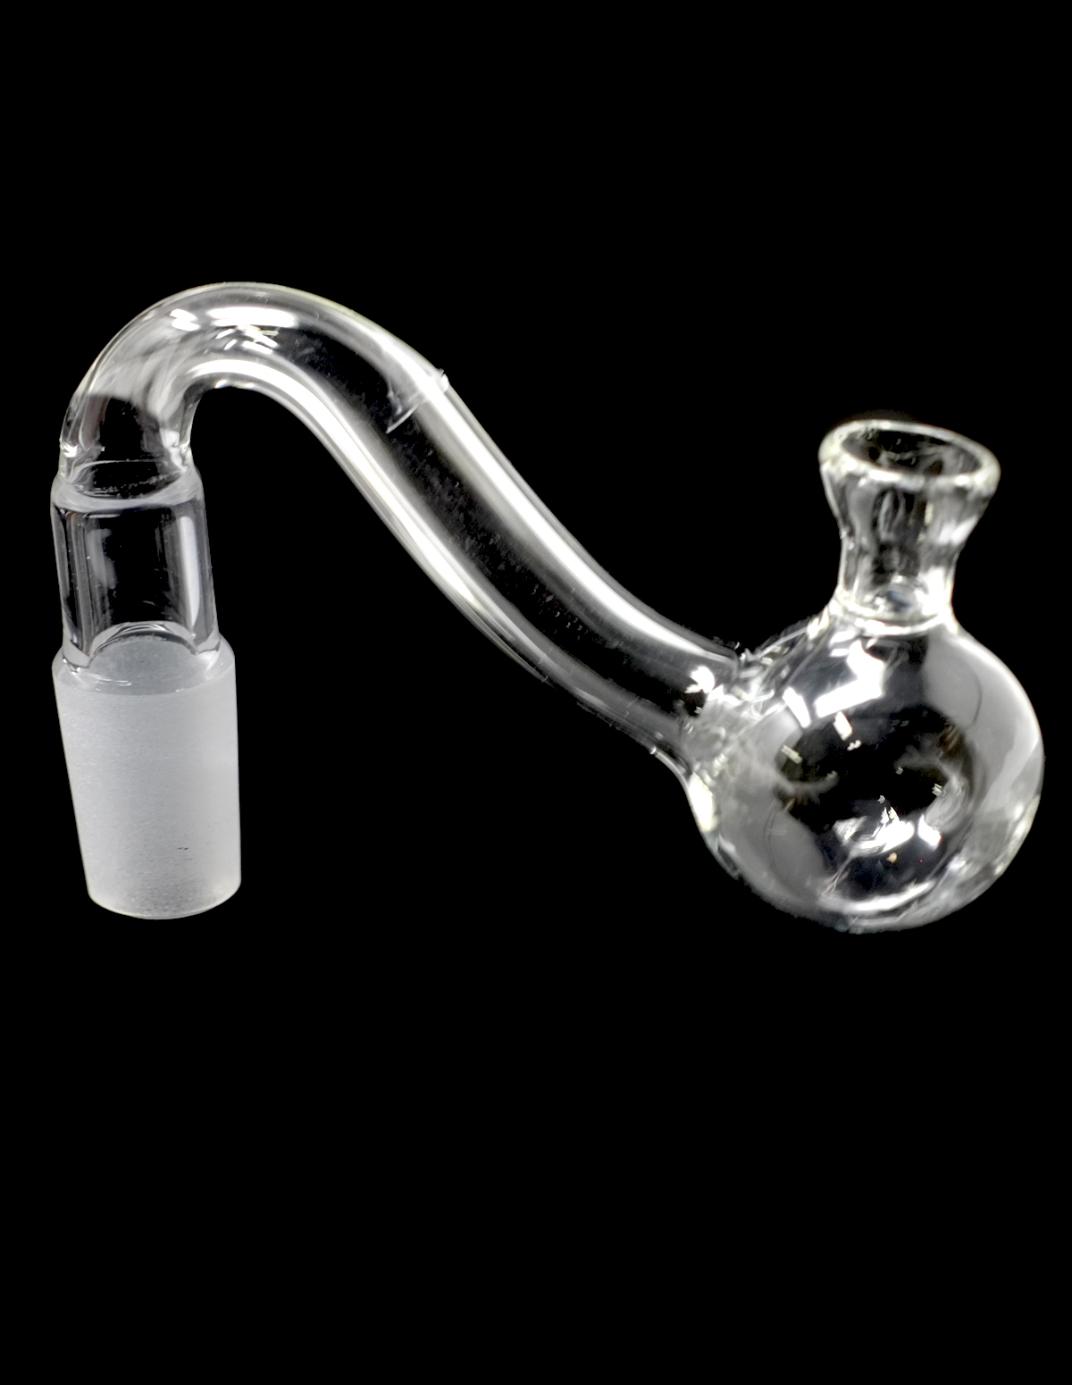 Glass Oil Burner PIPE Bowl With Funnel Attachment For Water PIPE